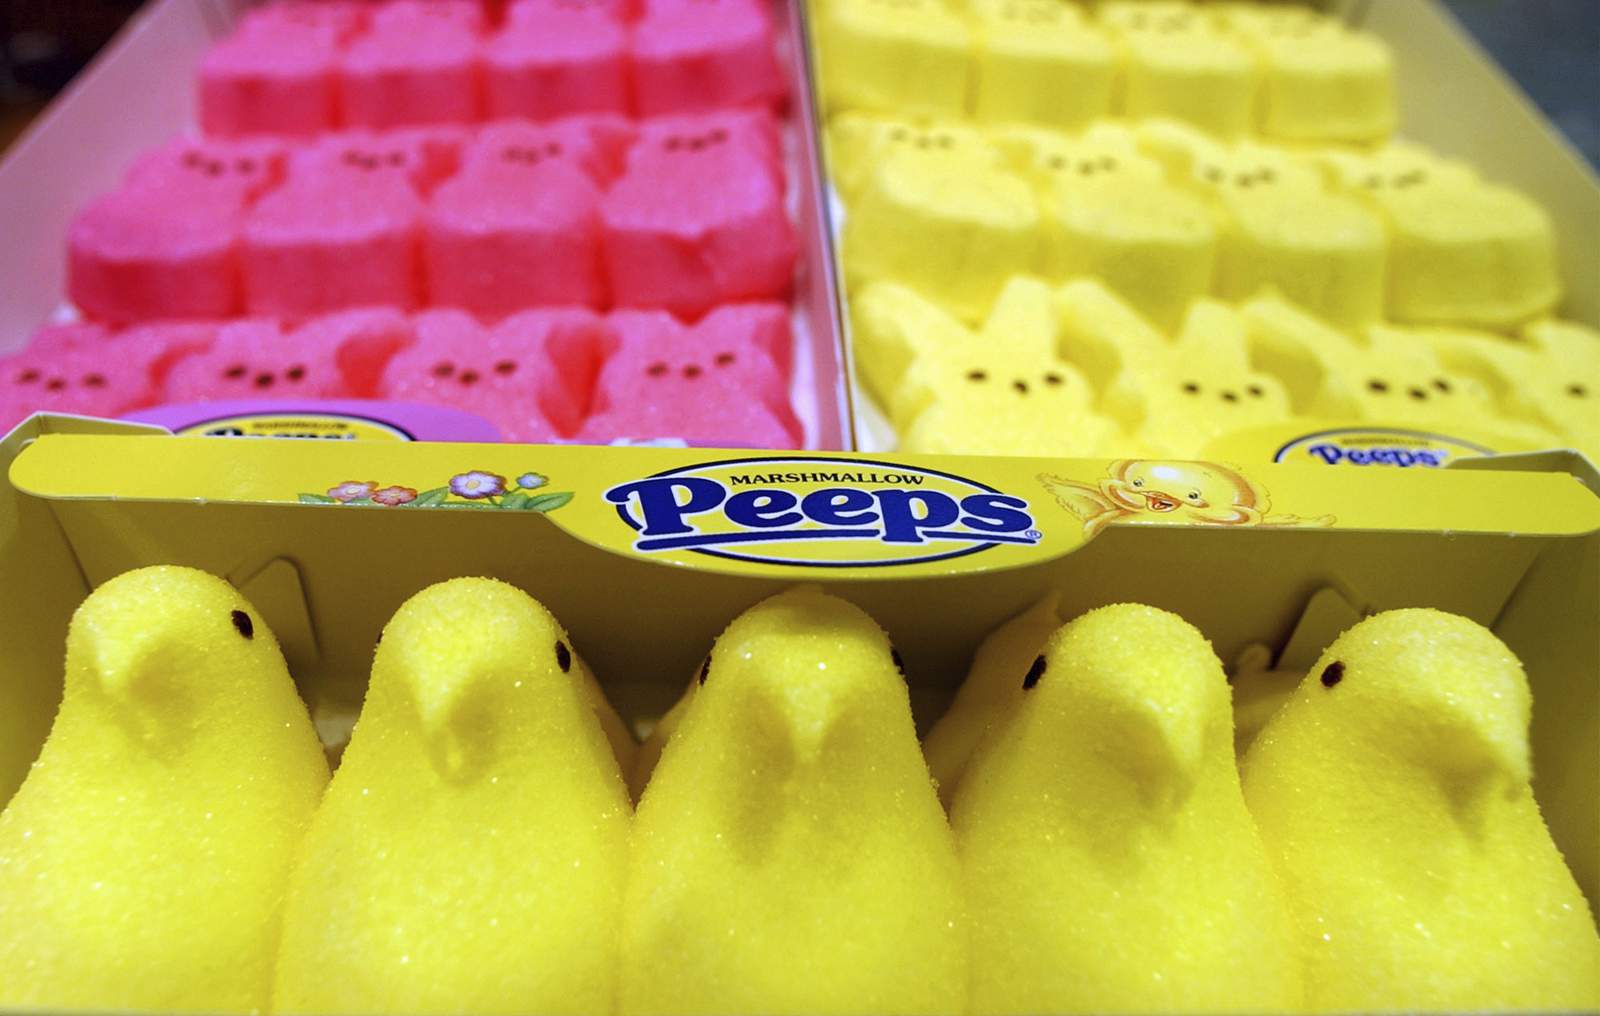 Report: There will be no Halloween or Christmas Peeps this year